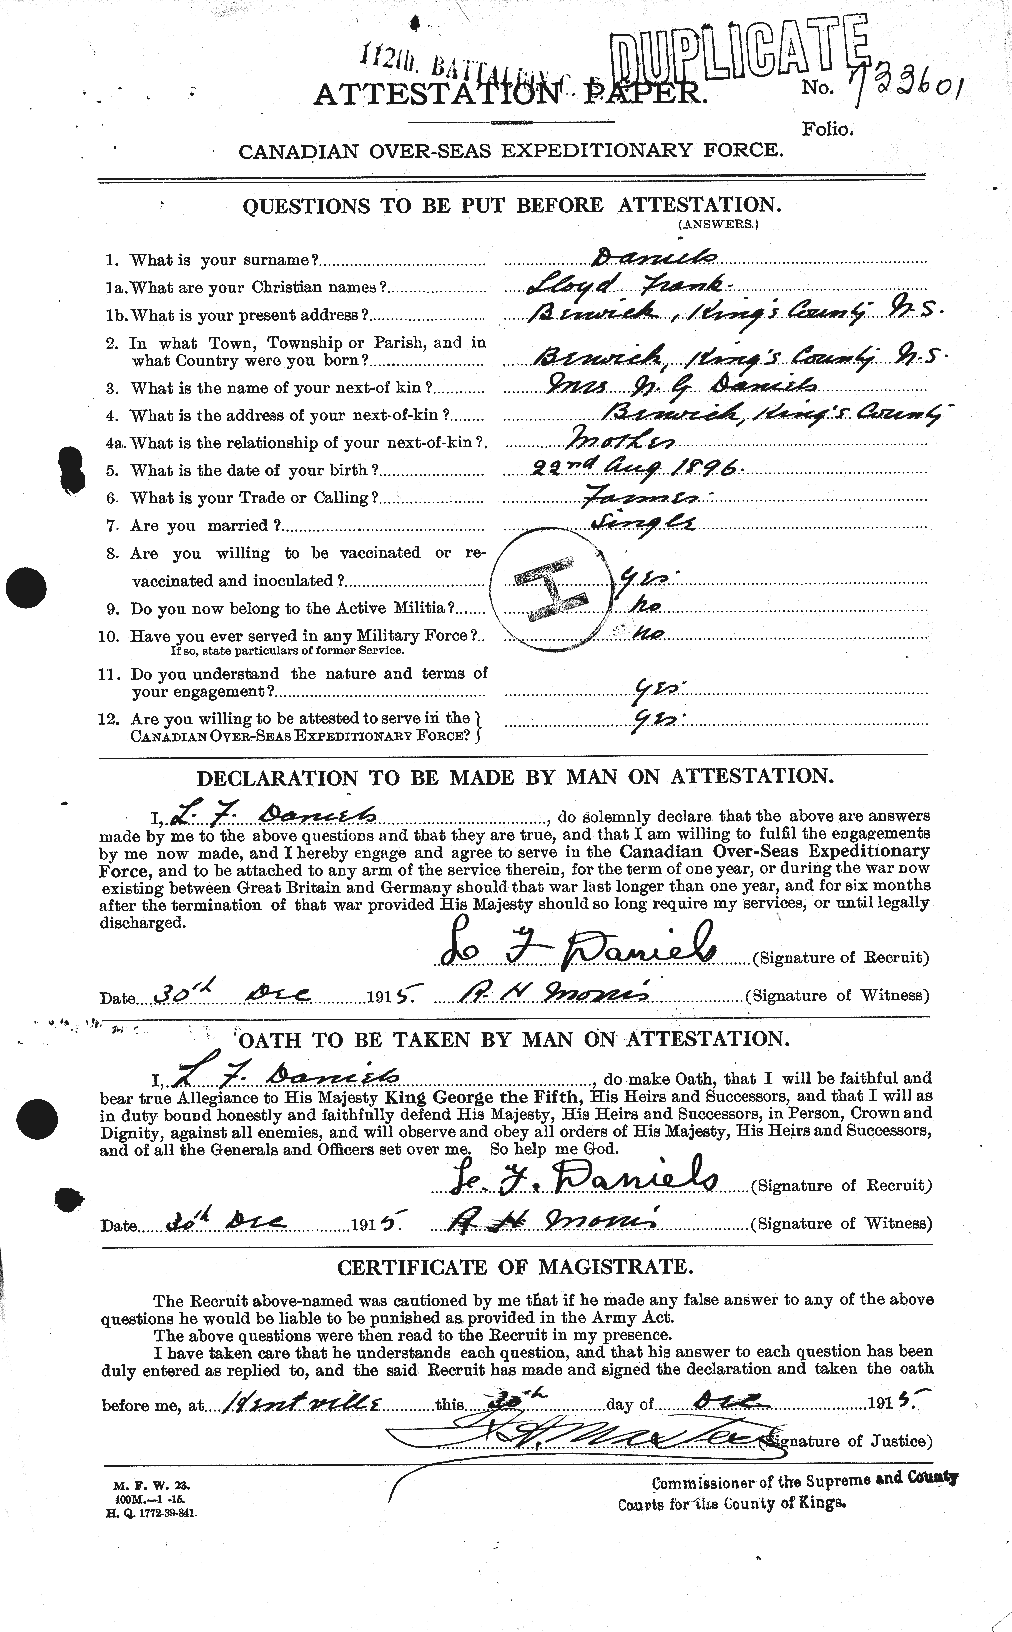 Personnel Records of the First World War - CEF 279652a